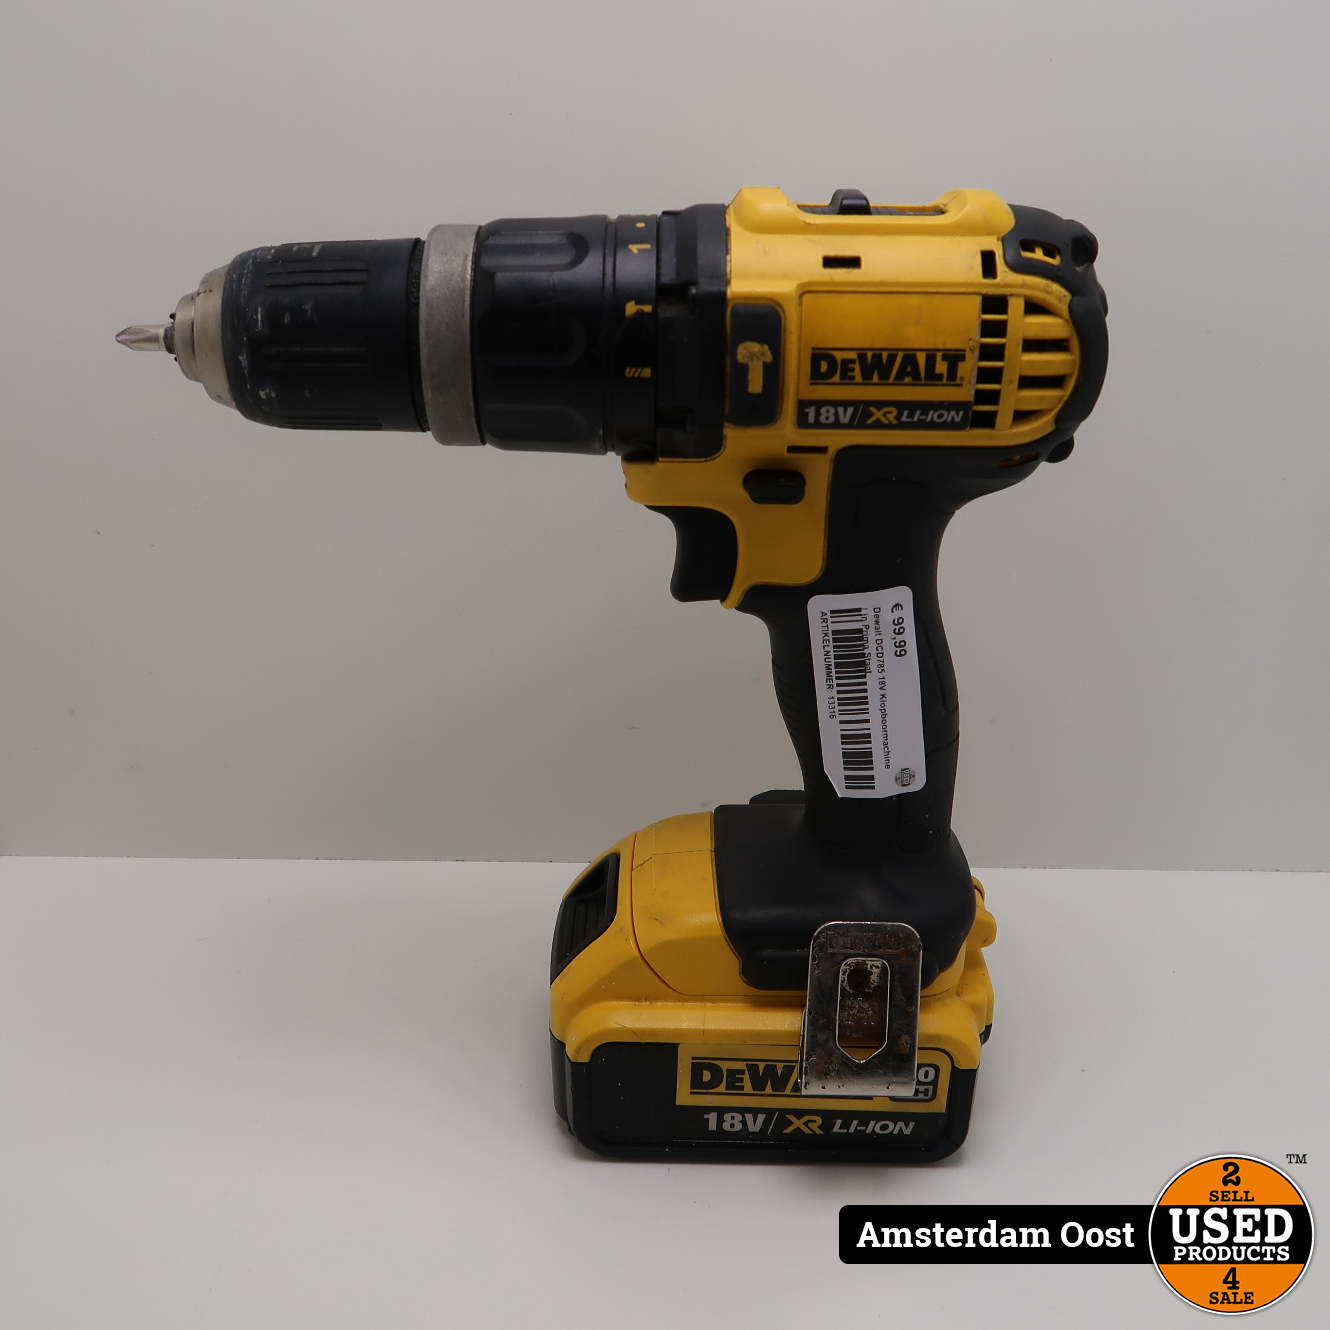 Dewalt DCD785 18V | in Prima Staat - Used Products Amsterdam Oost